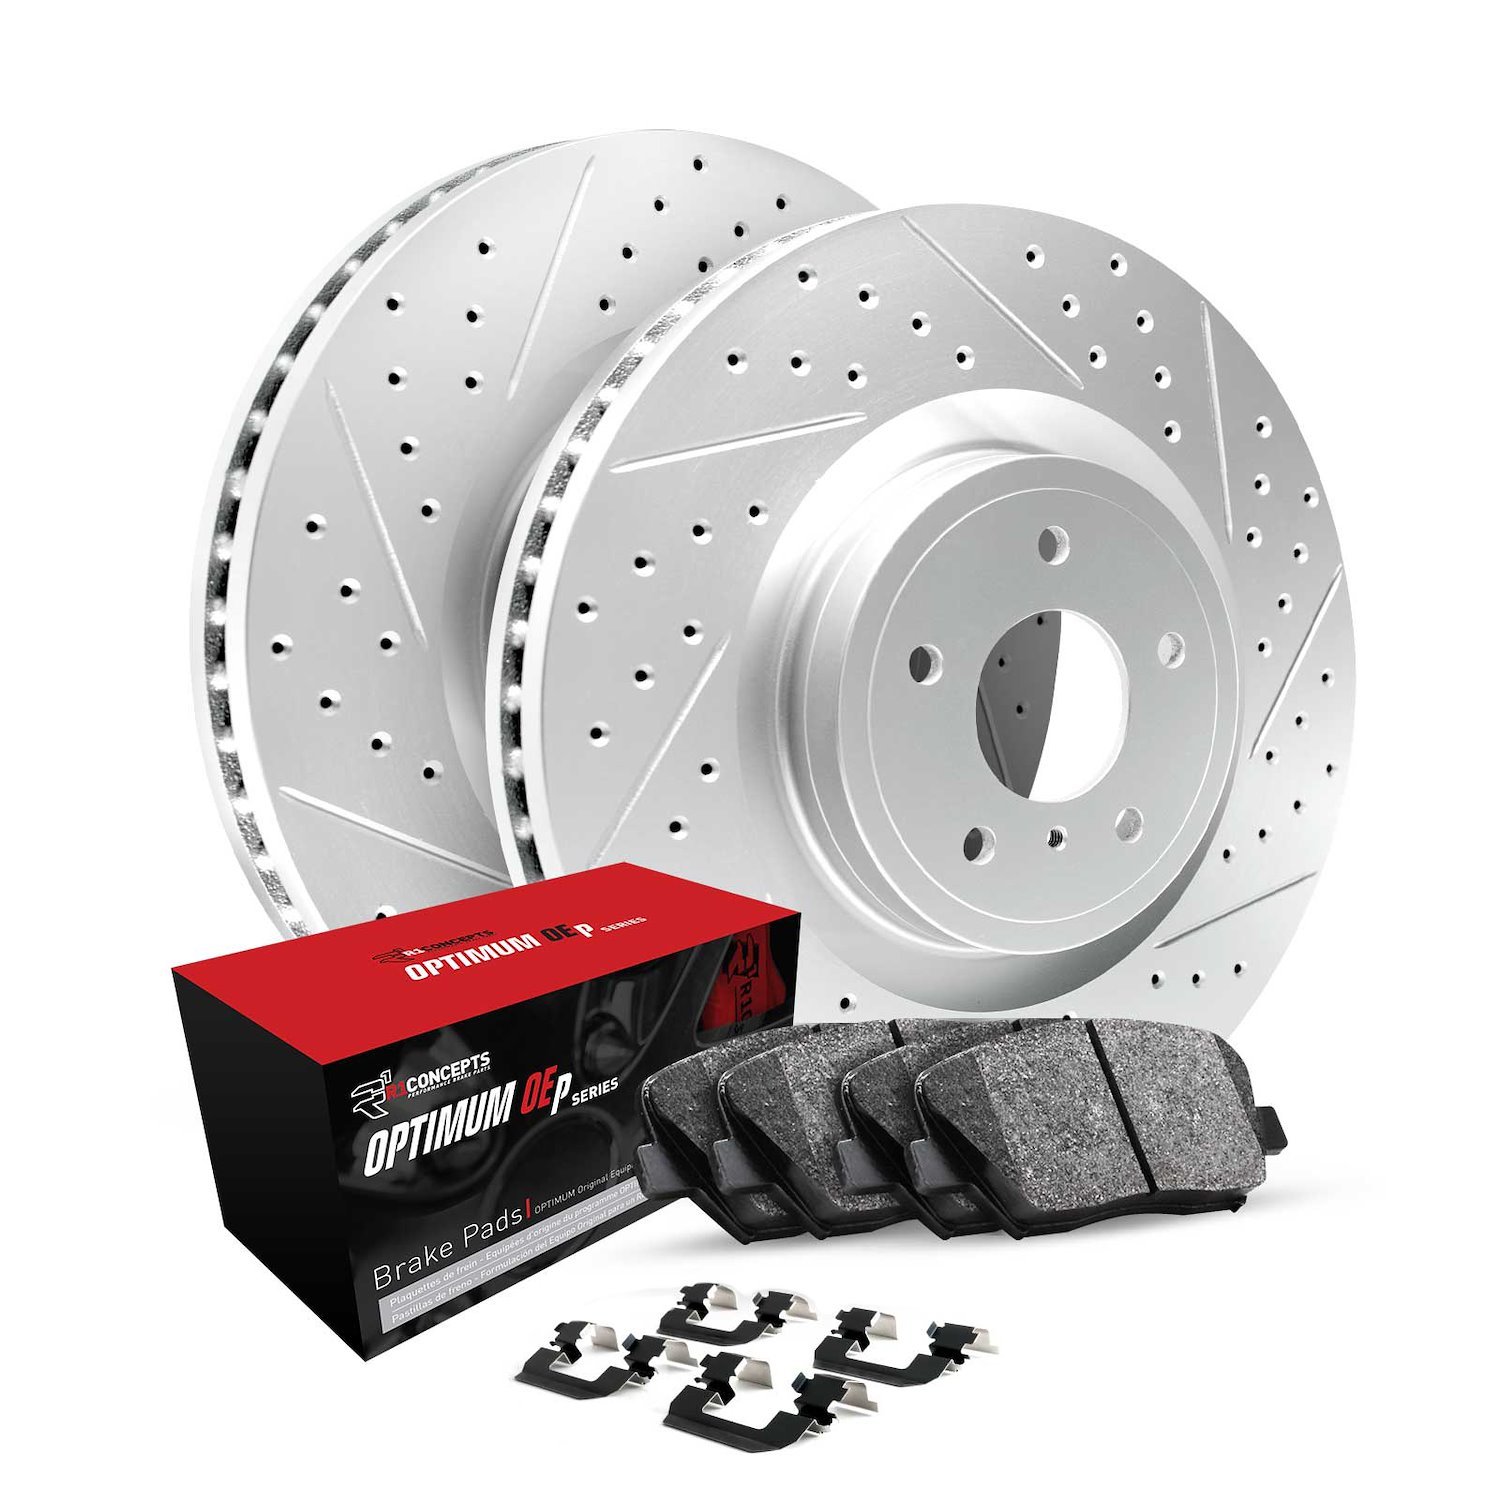 GEO-Carbon Drilled & Slotted Brake Rotor Set w/Optimum OE Pads & Hardware, 2003-2008 Fits Multiple Makes/Models